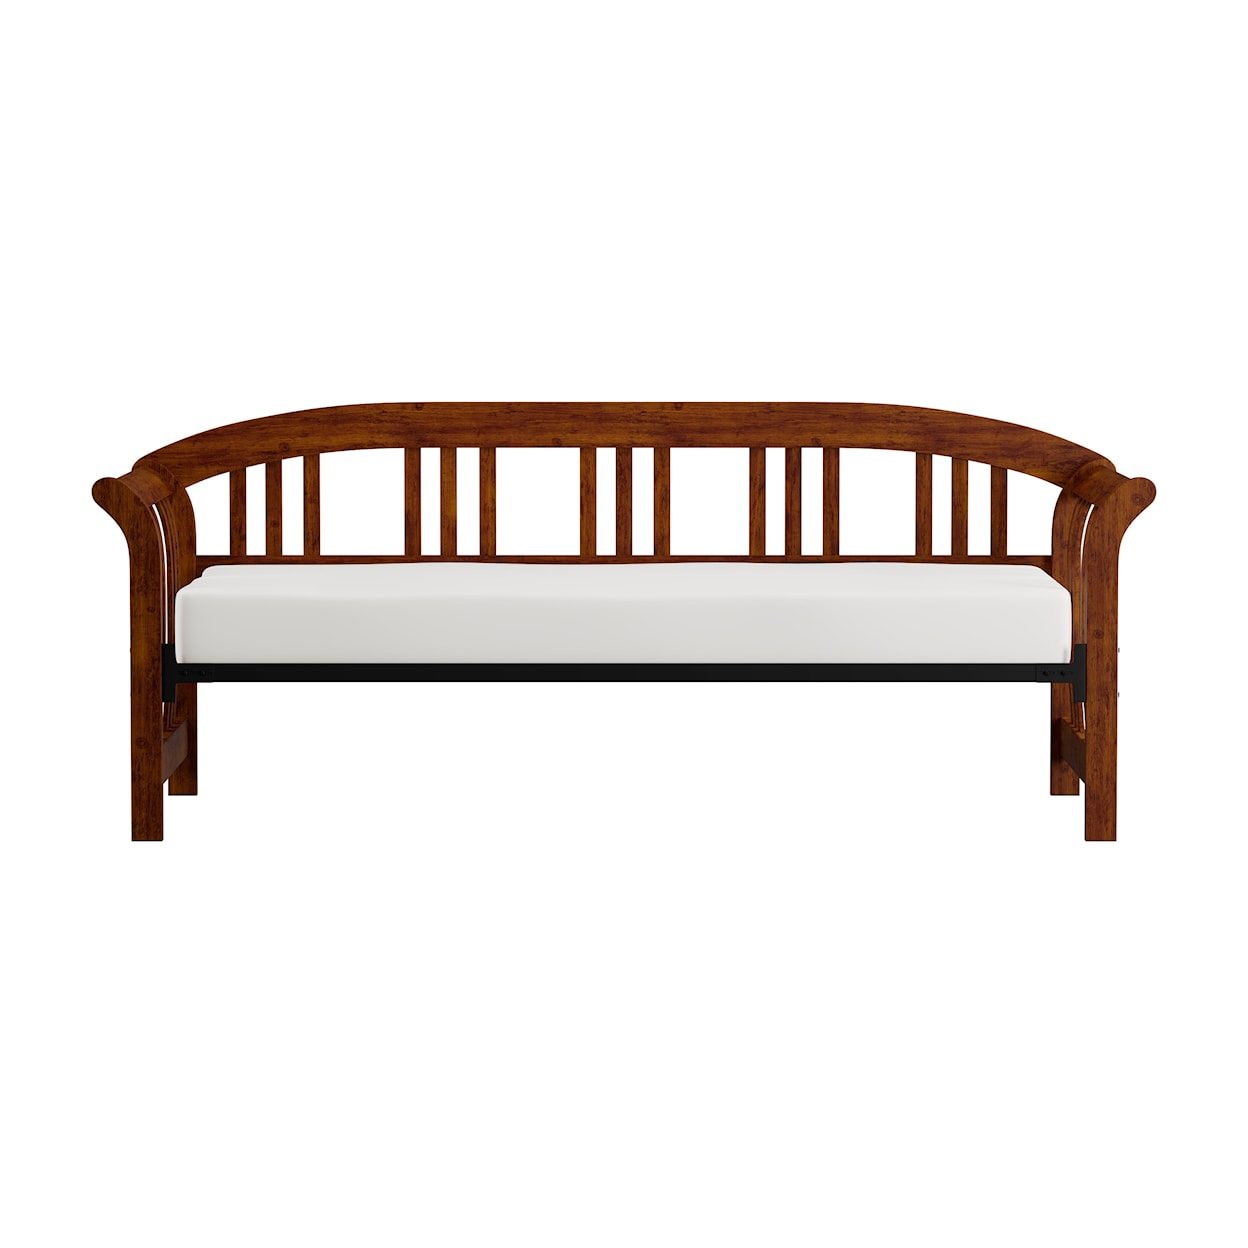 Hillsdale Dorchester Twin Daybed